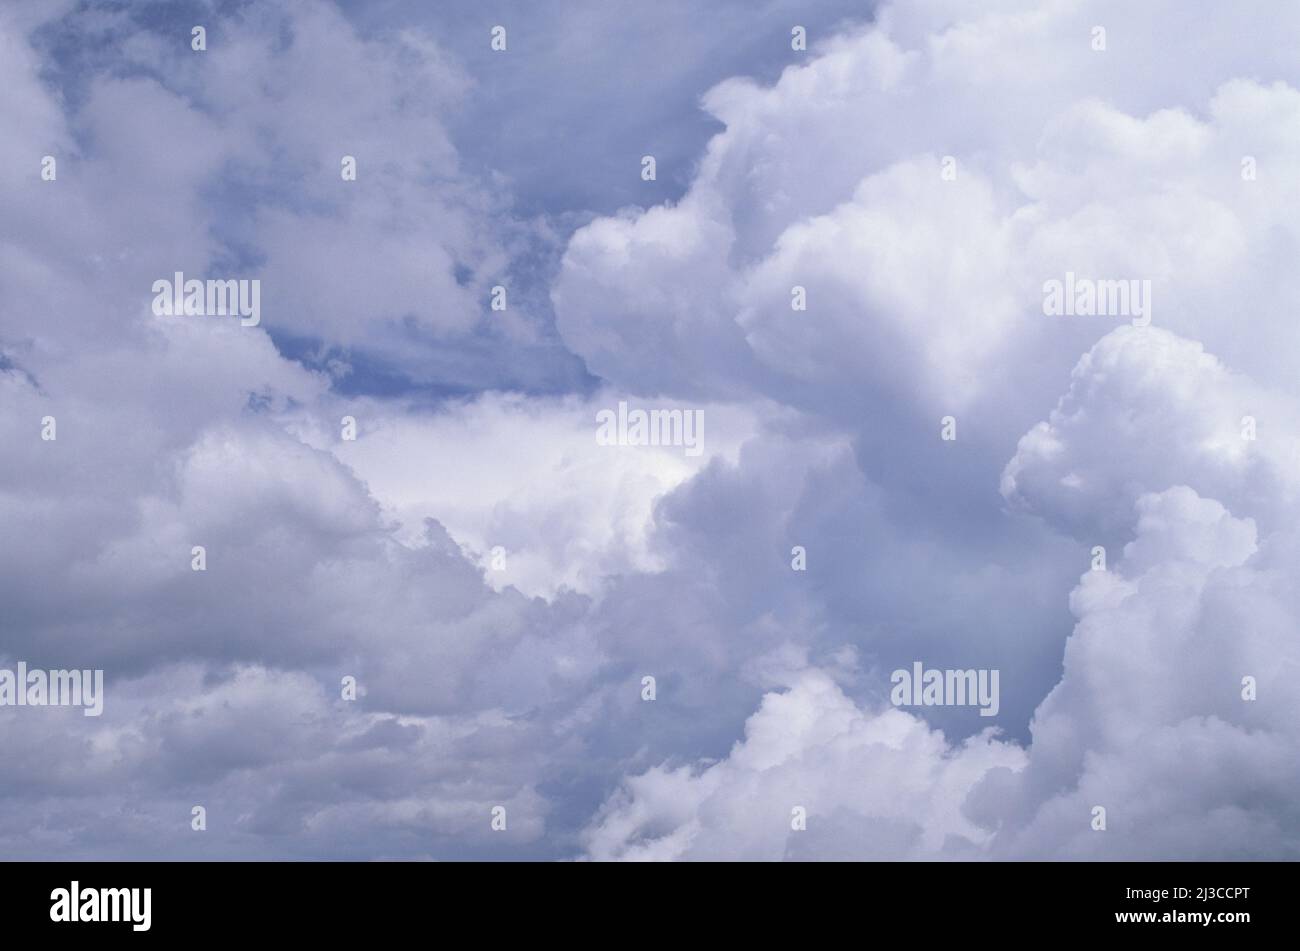 Hail storm. Dramatic cloud formation in the sky before a hailstorm, rain and thunderstorm  Cumulus clouds in dramatic sky. Stock Photo